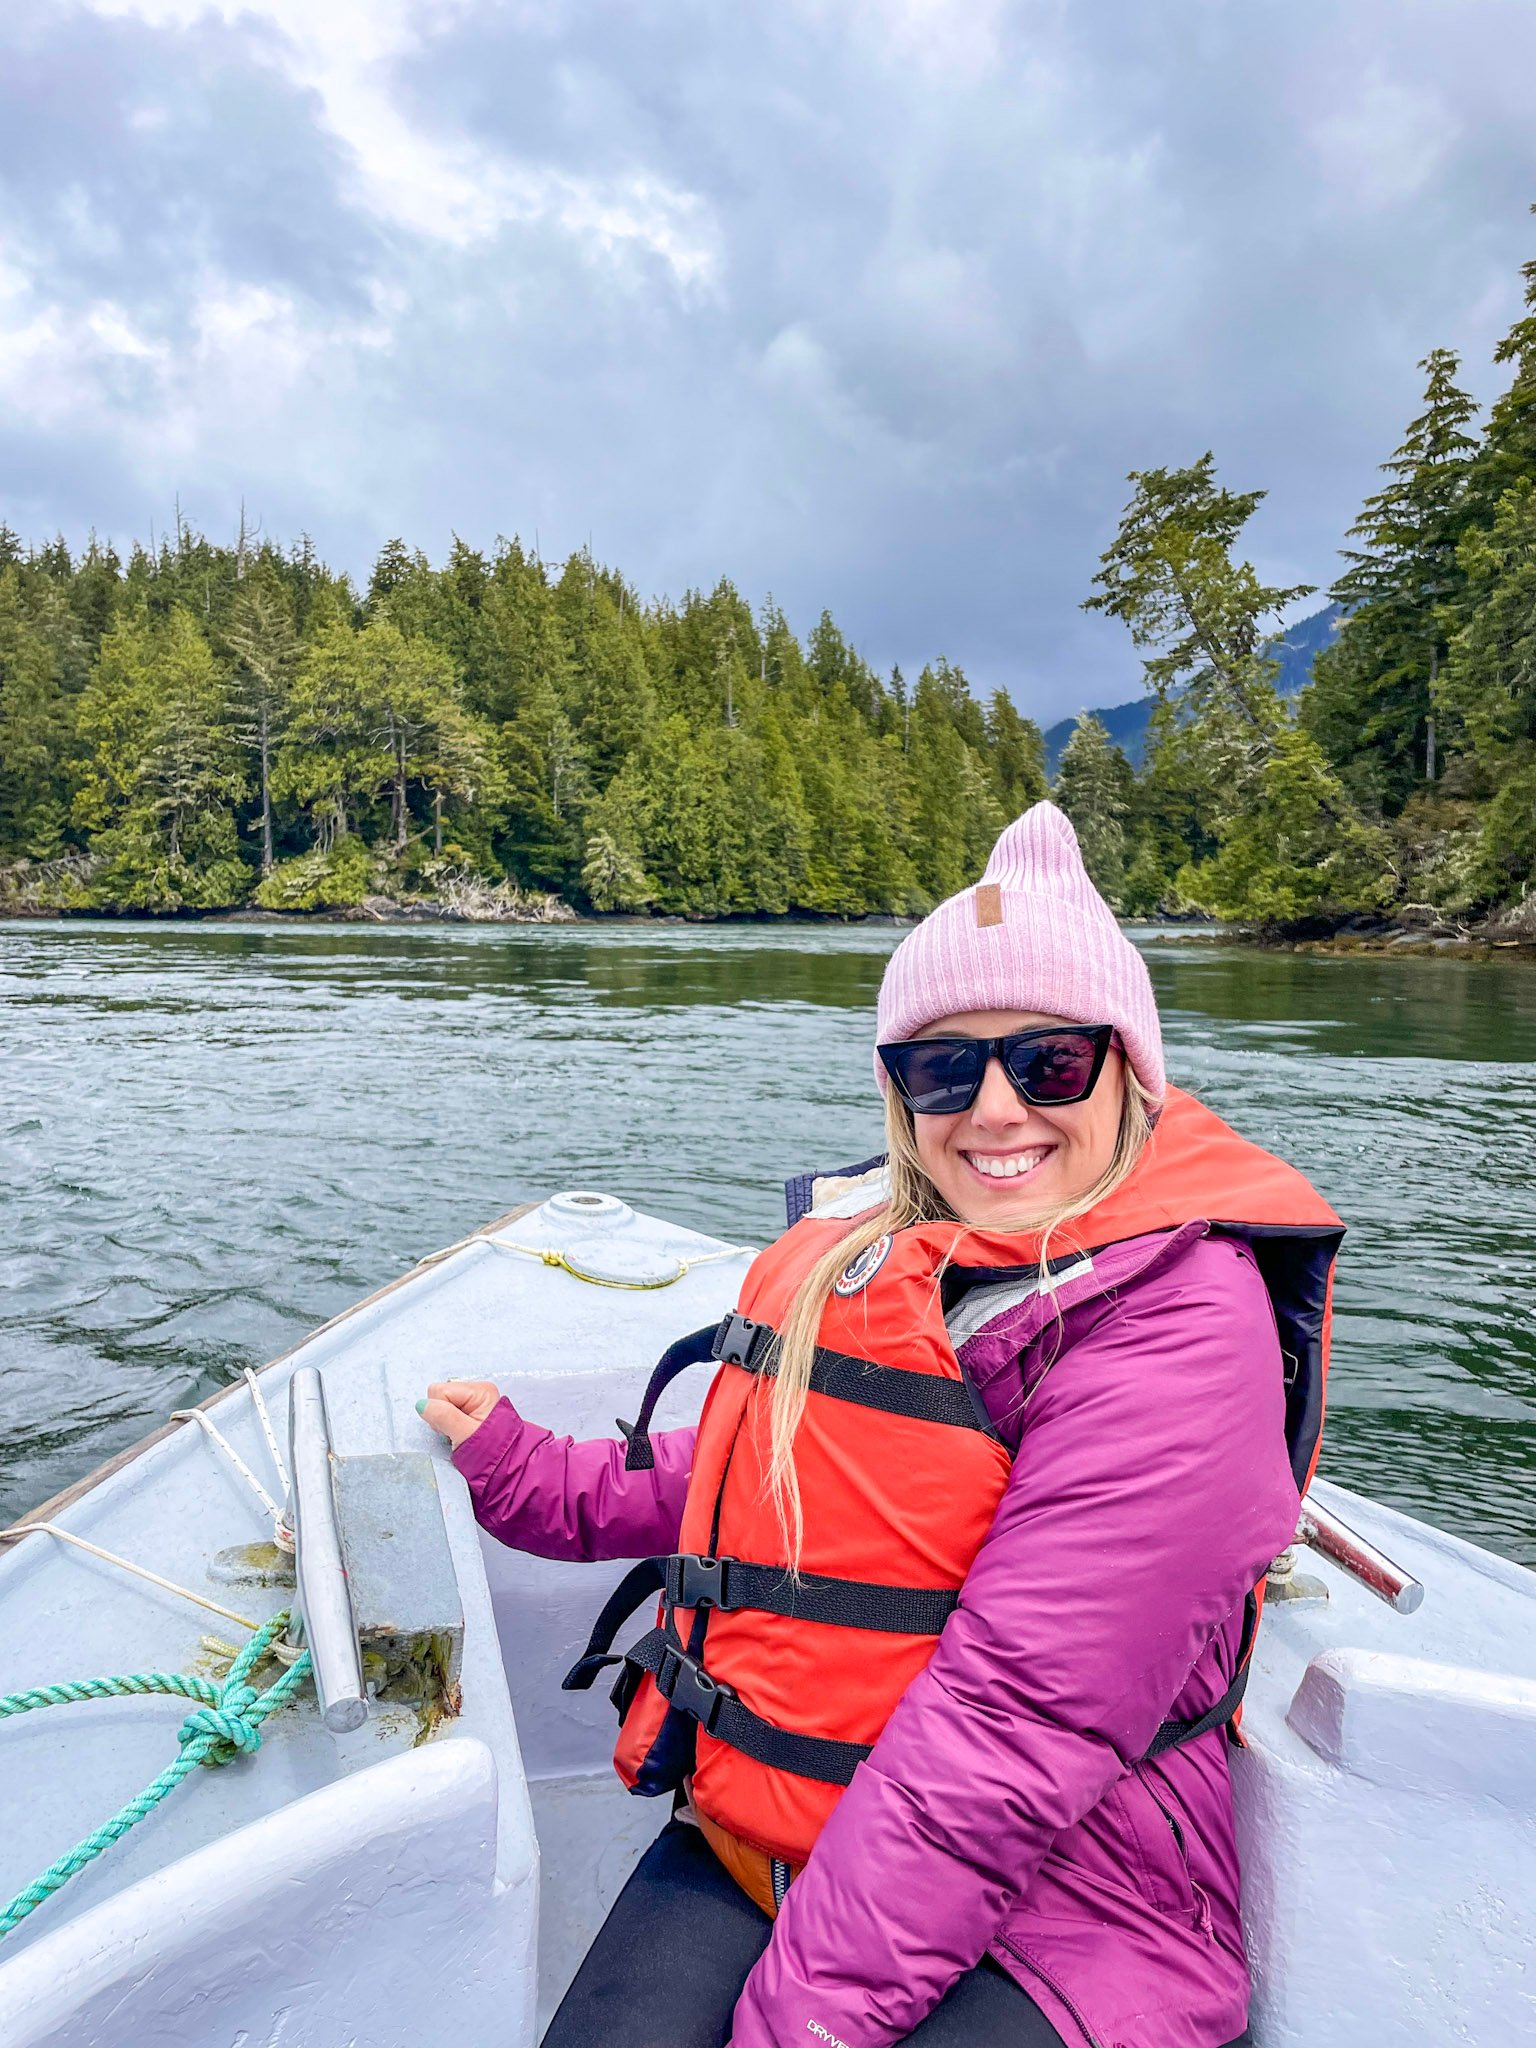 boat rides from tofino